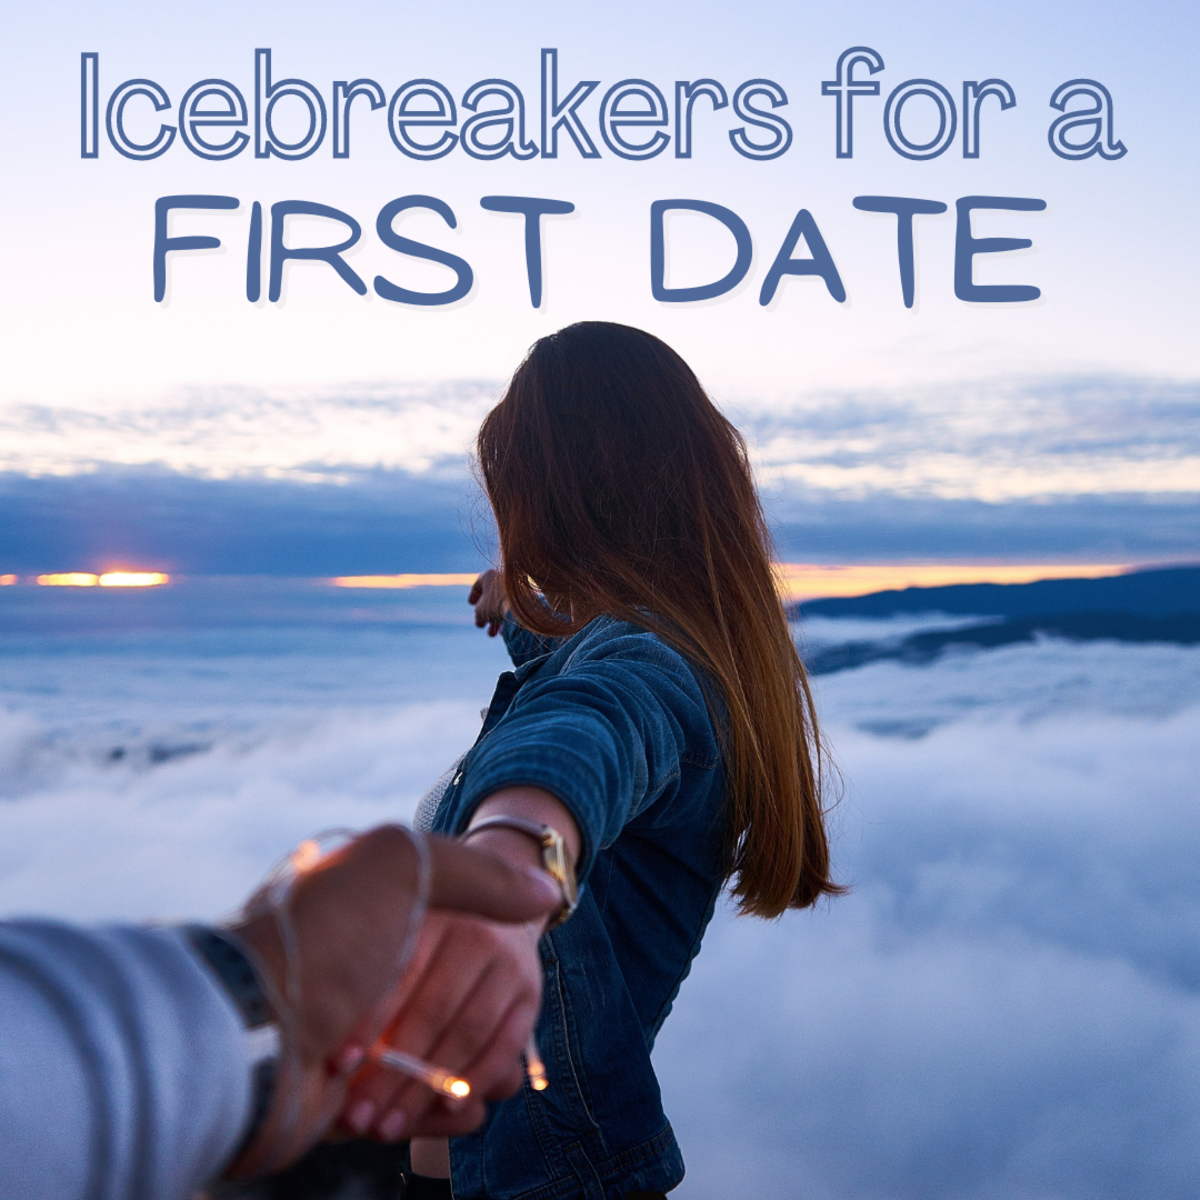 30+ Questions and Icebreakers to Ask on a First Date